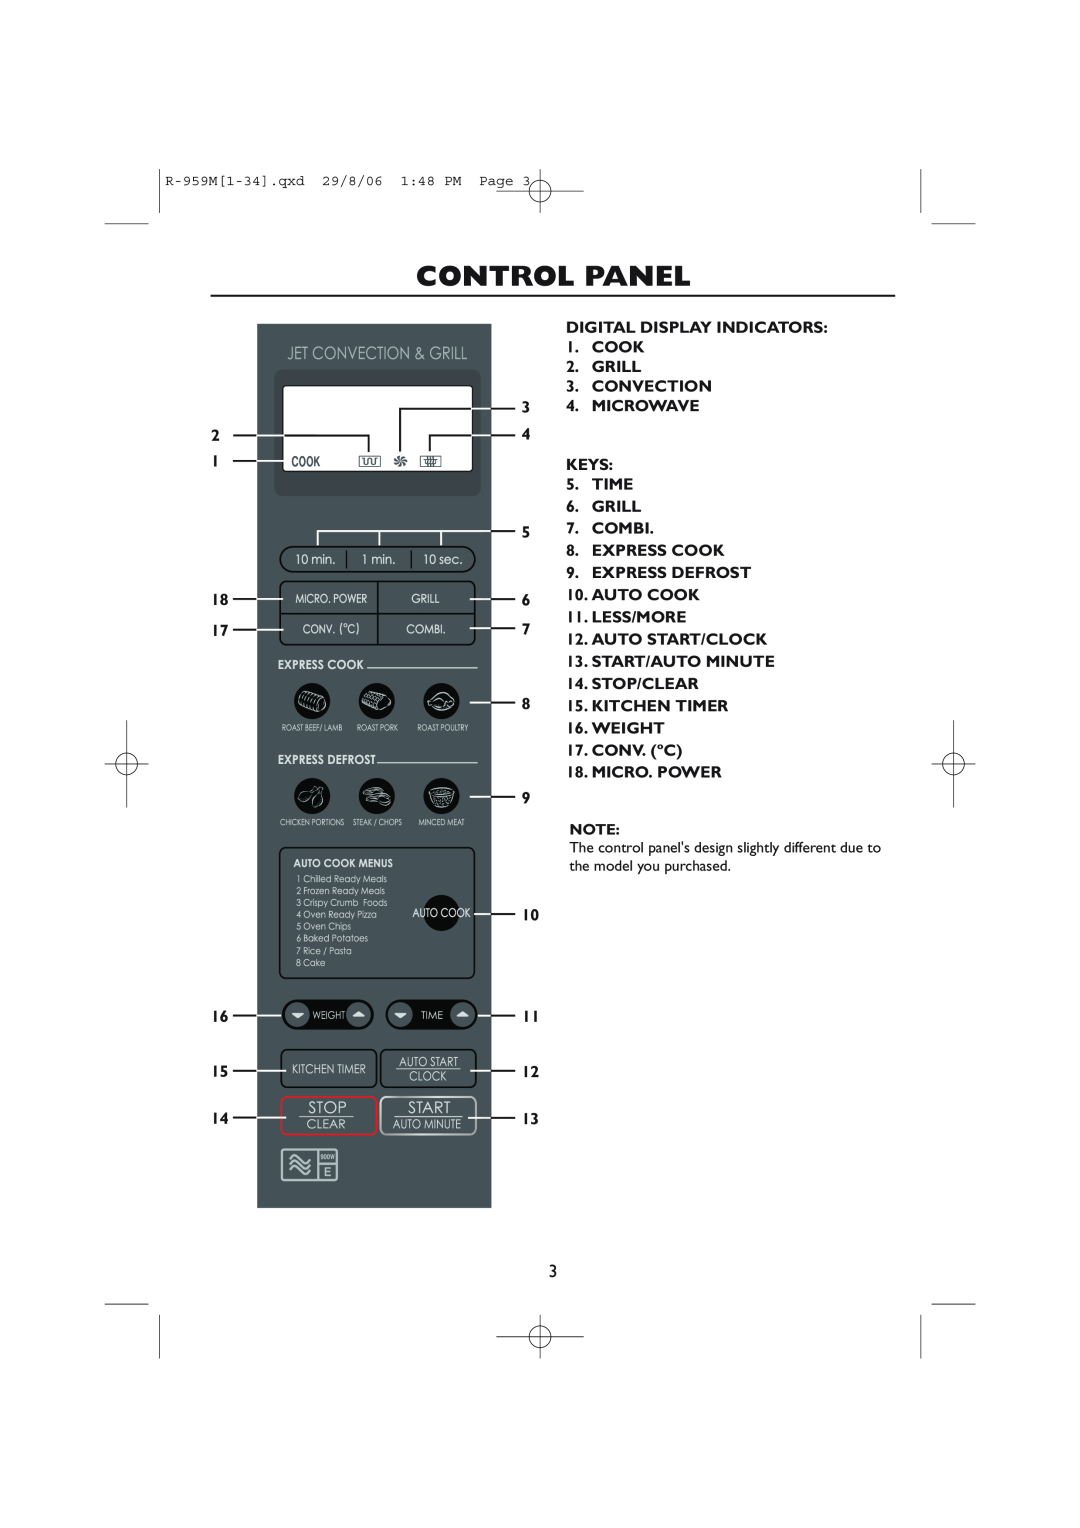 Sharp R-959M Control Panel, DIGITAL DISPLAY INDICATORS 1. COOK 2. GRILL 3. CONVECTION, Express Defrost, Auto Cook, Weight 